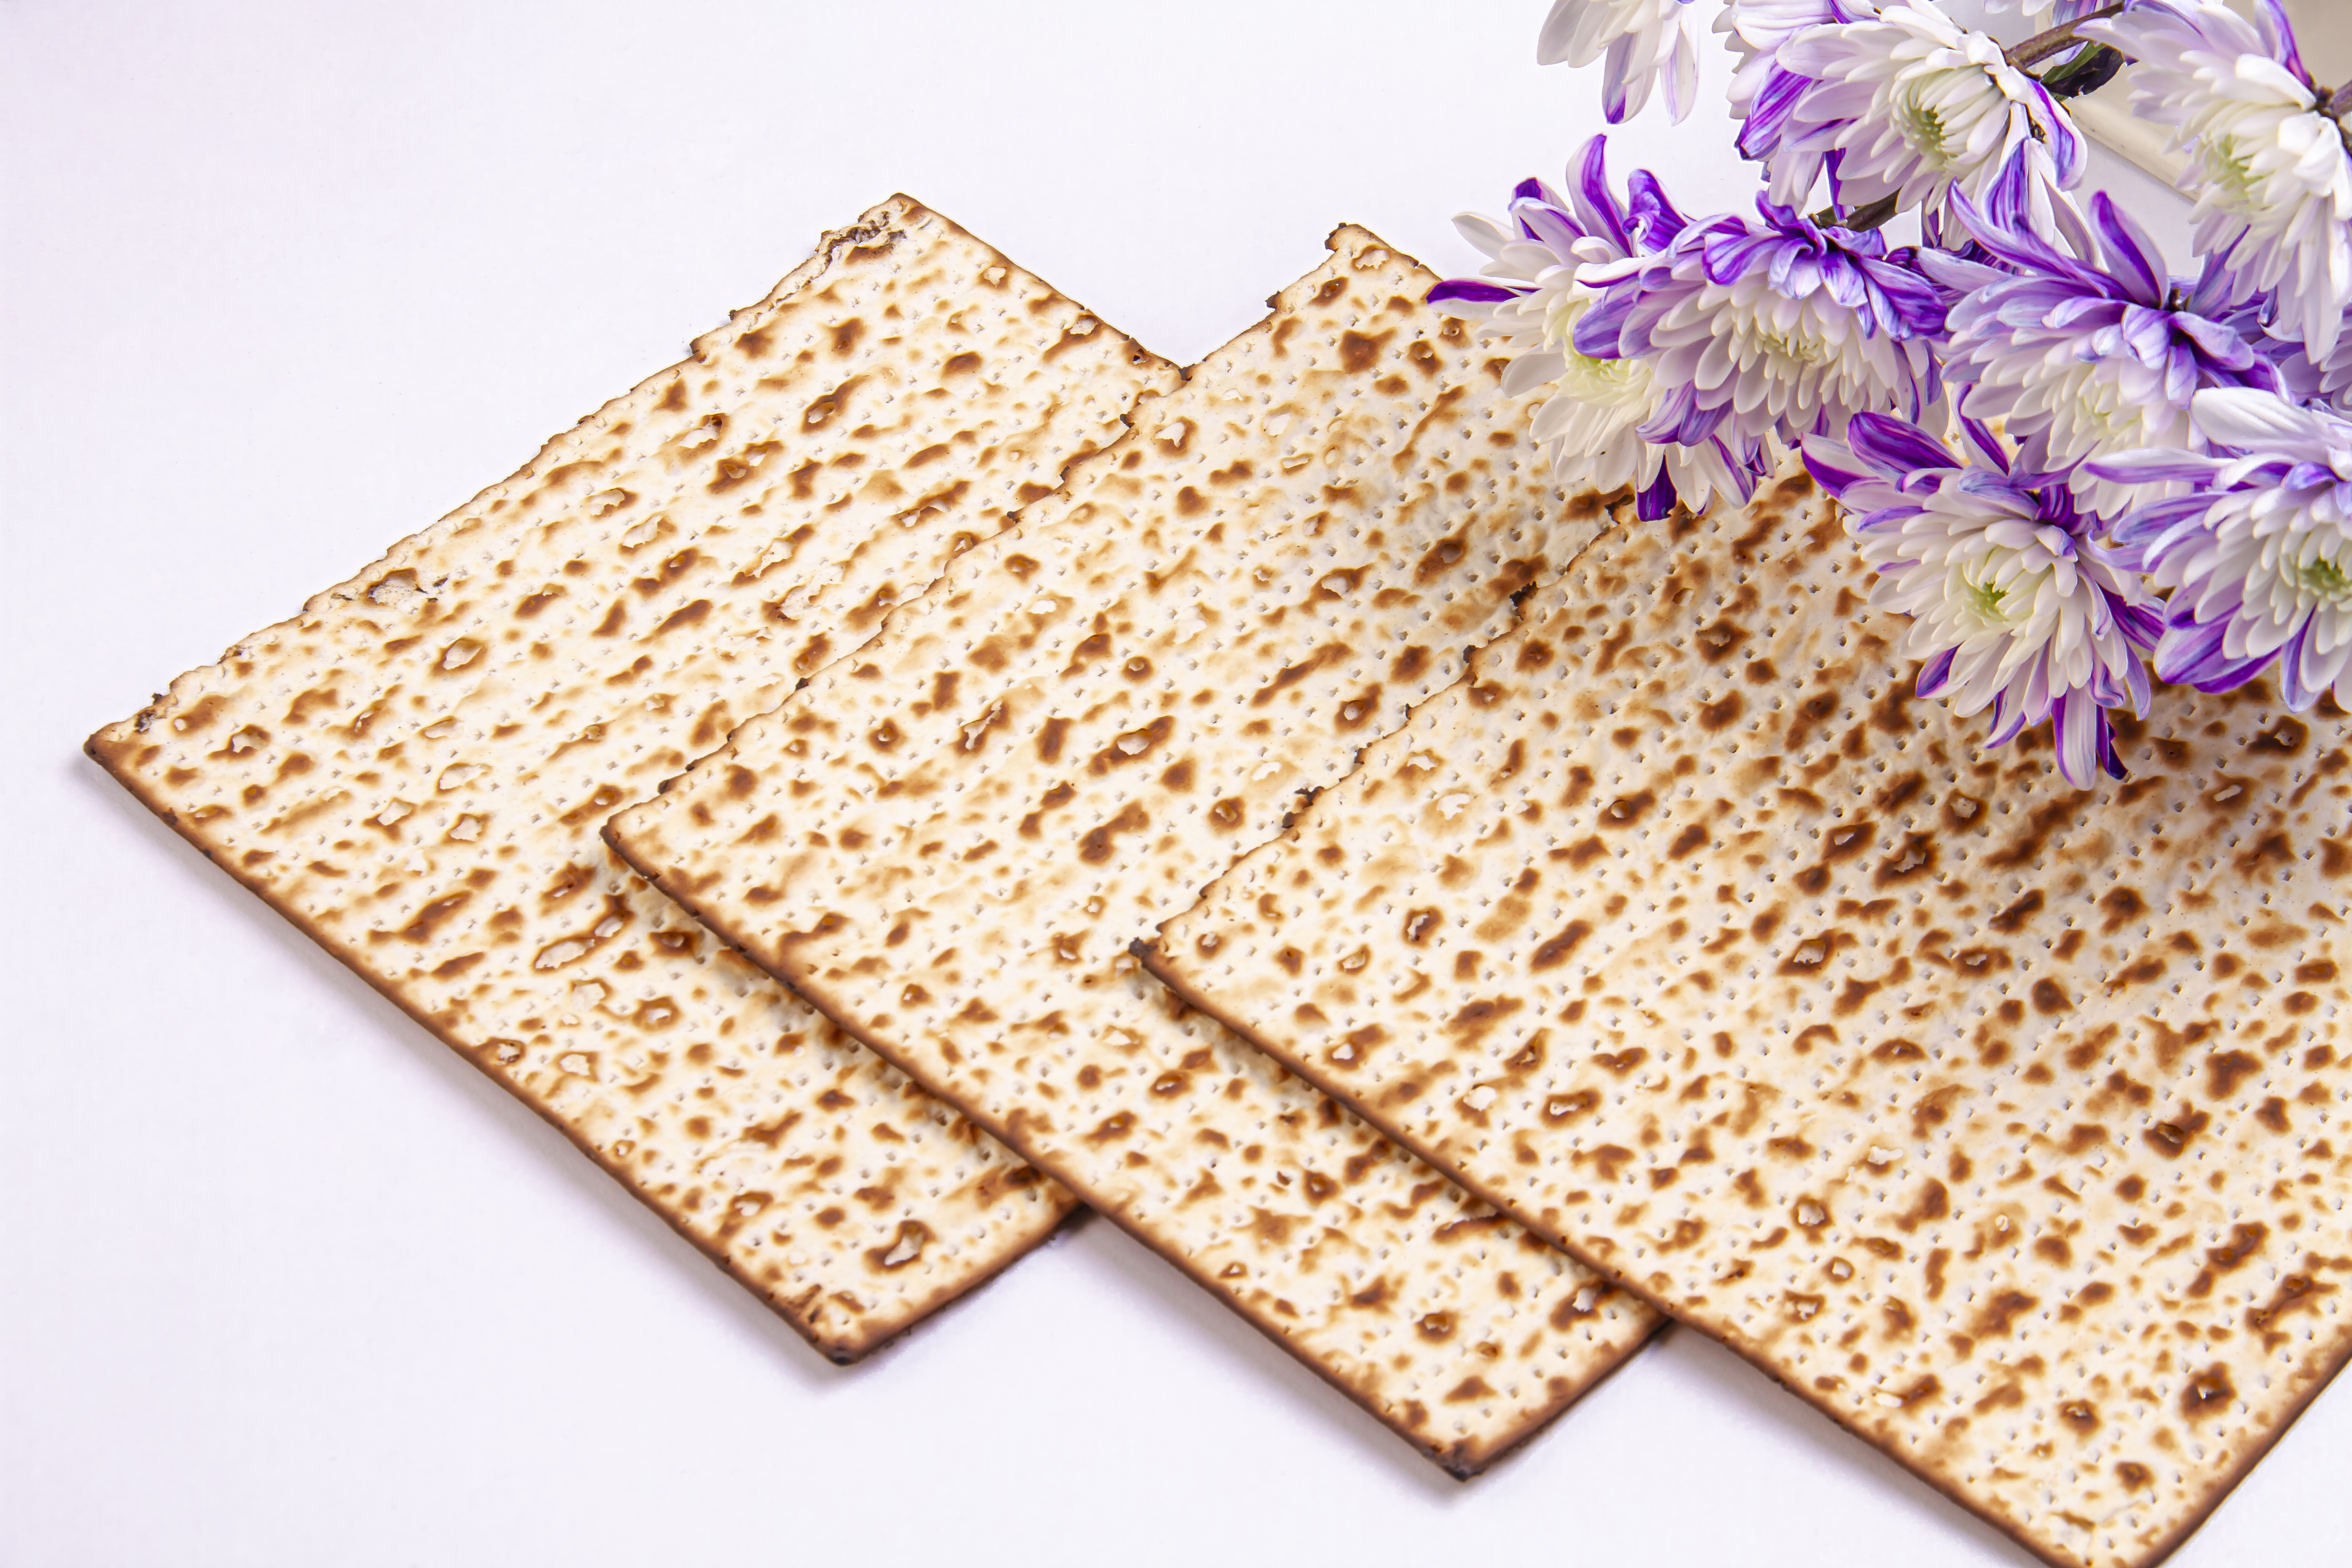 Passover Background With Matzah And White And Purple Chrysanthem